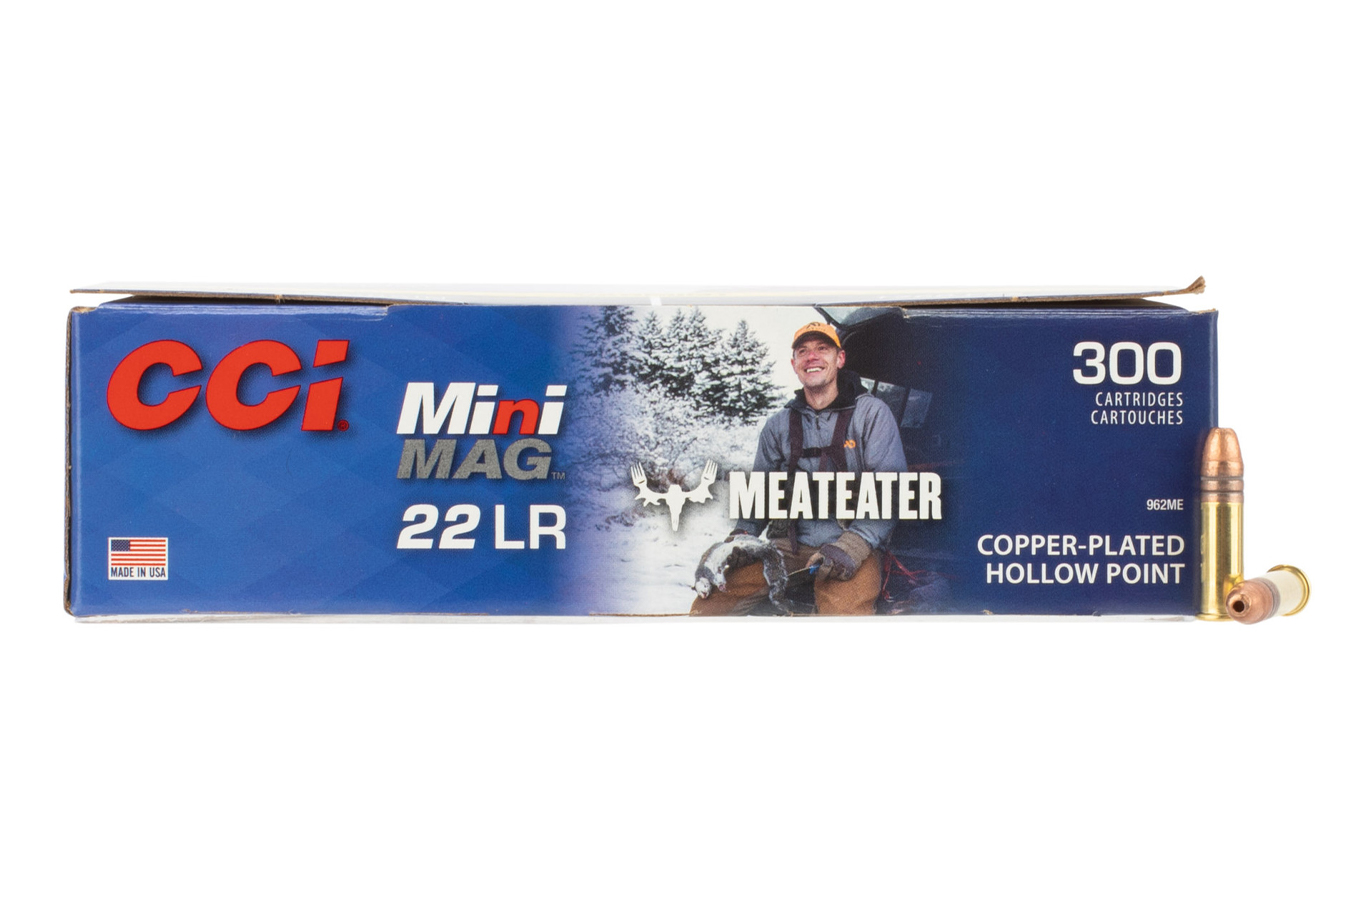 22 LR 36 GR COPPER PLATED HOLLOW POINT MINI MAG MEATEATER 300/BOX